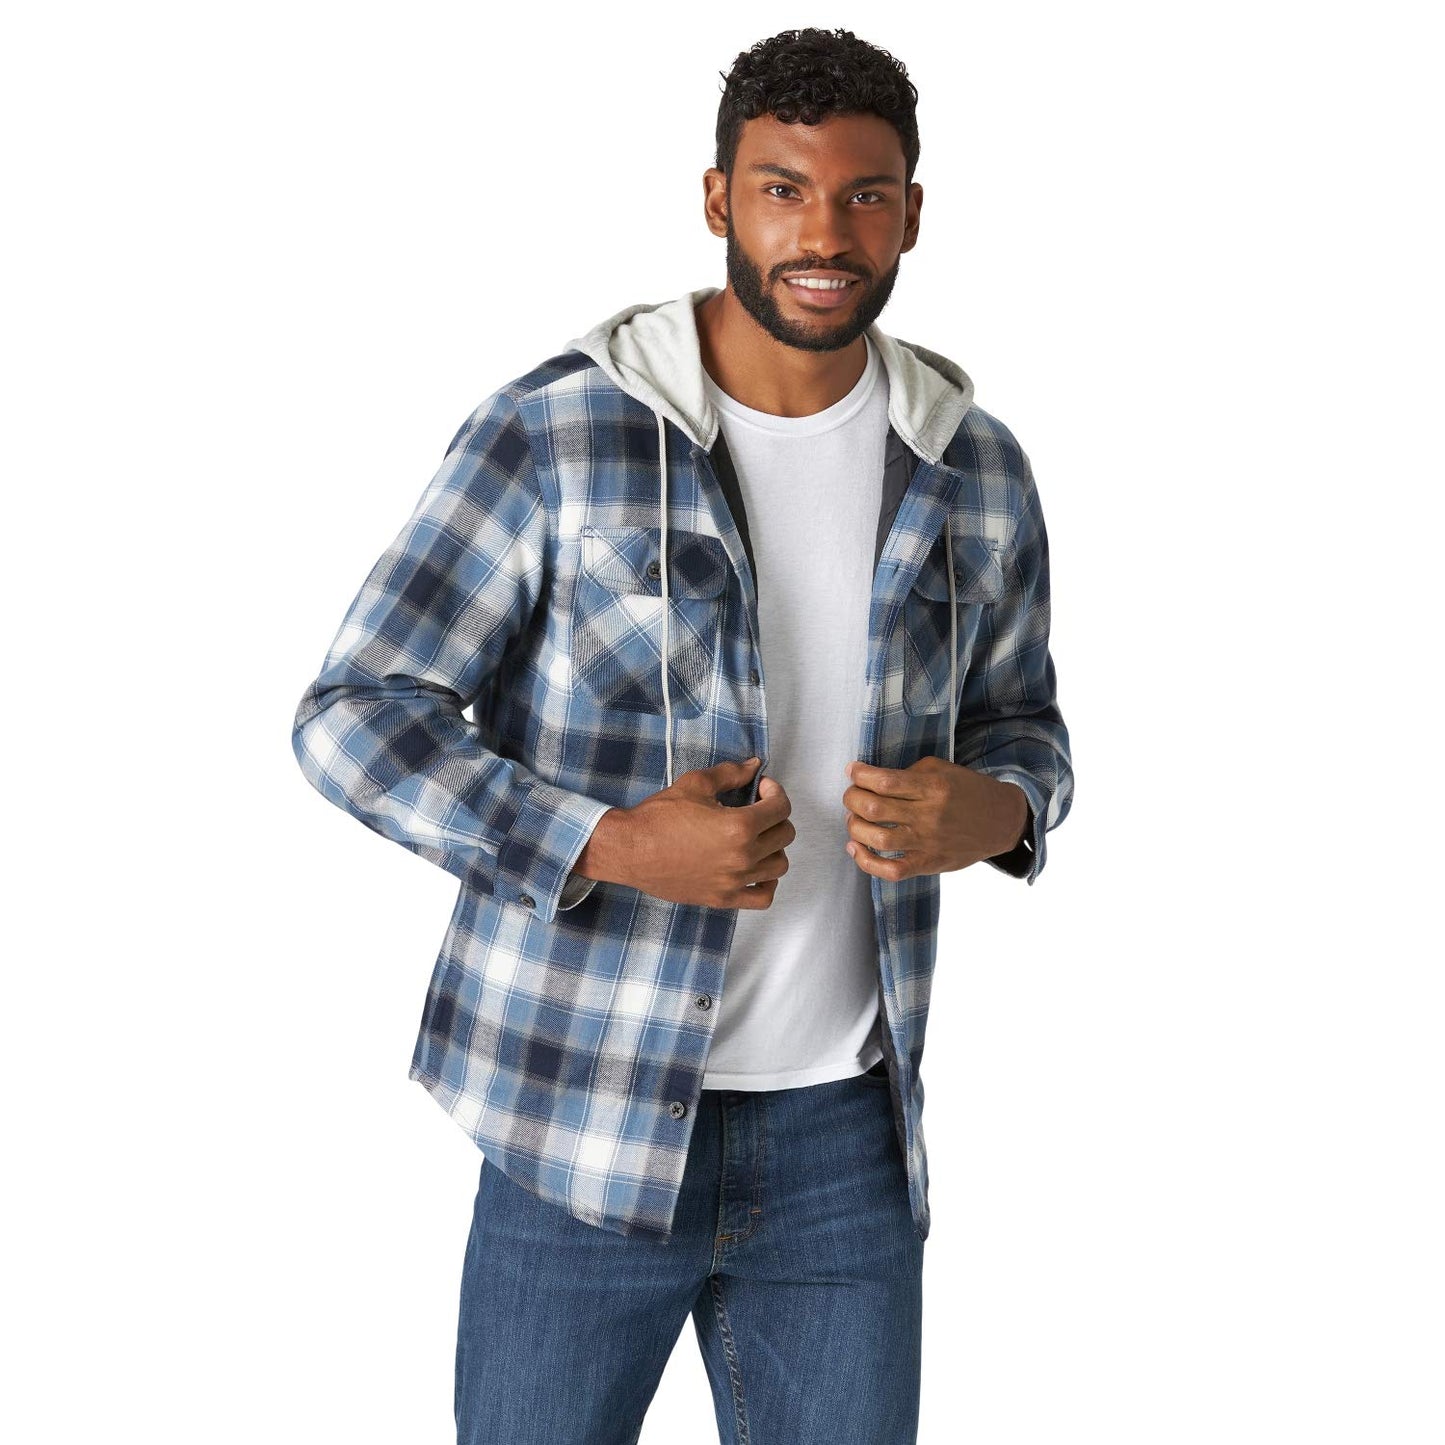 Wrangler Authentics Men's Long Sleeve Quilted Lined Flannel Shirt Jacket with Hood, Blue/Black, X-Large